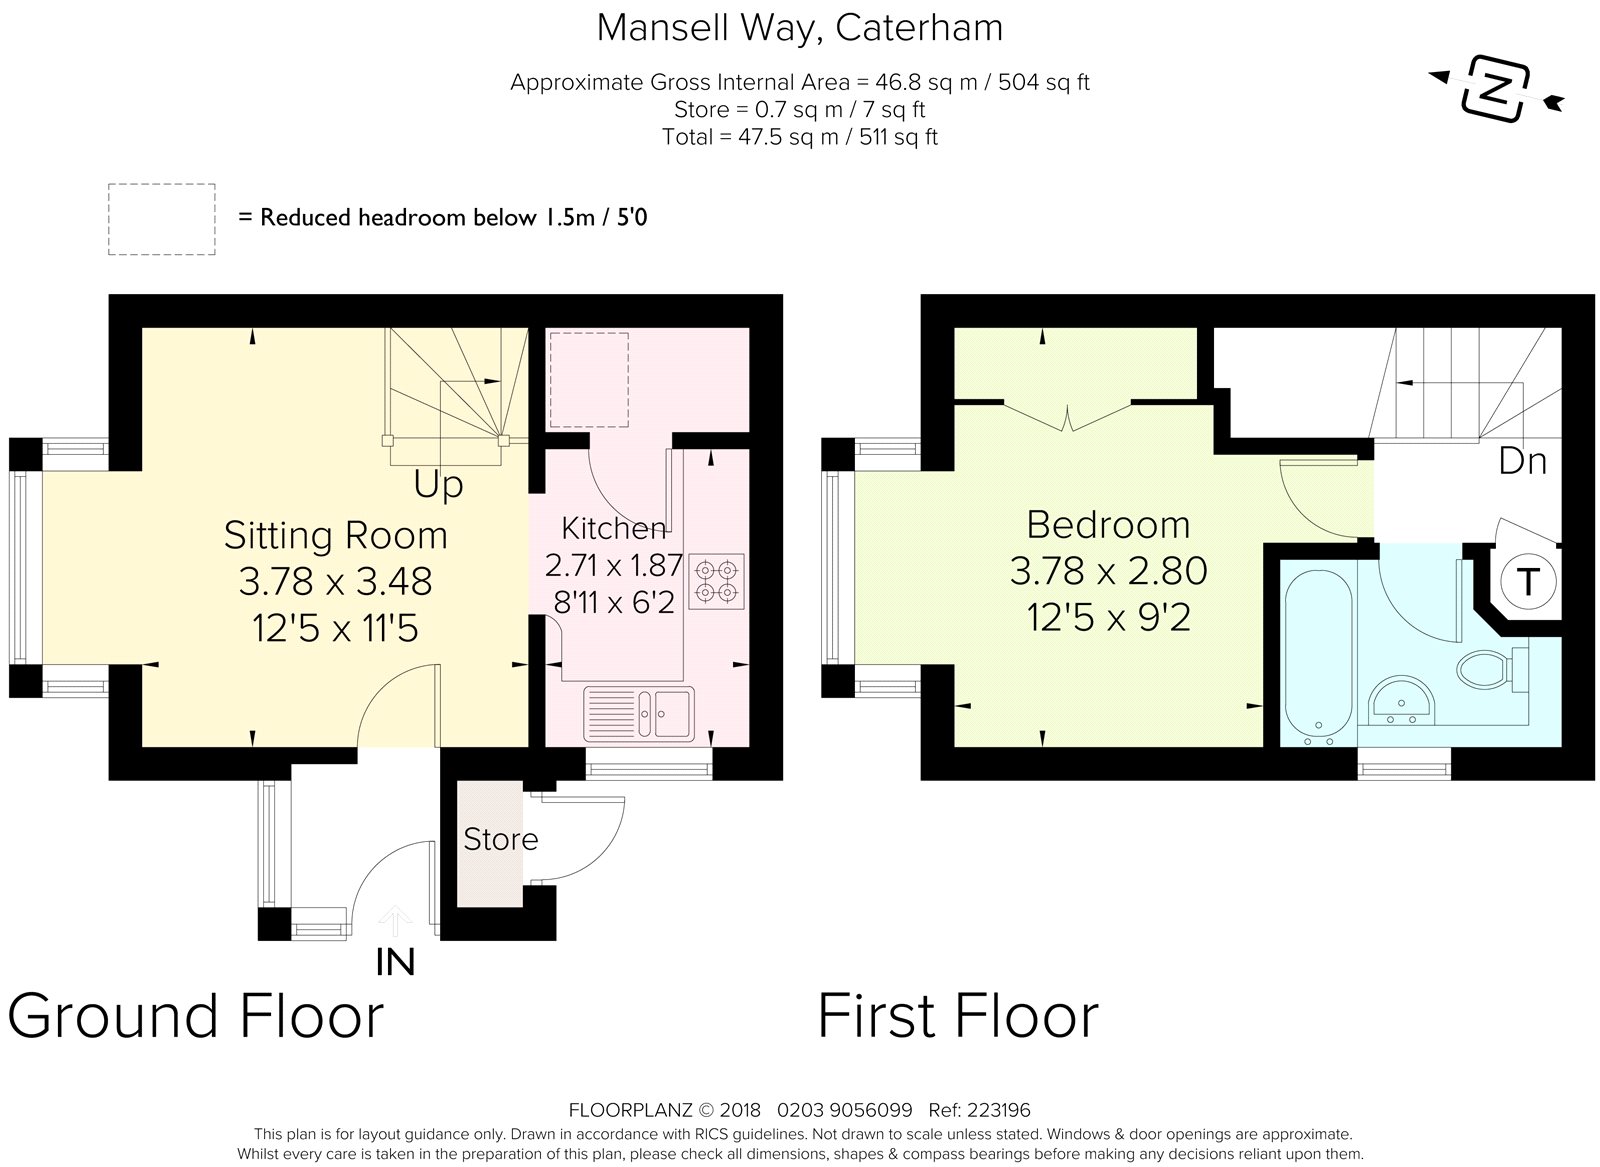 1 Bedrooms Semi-detached house for sale in Mansell Way, Caterham, Surrey CR3